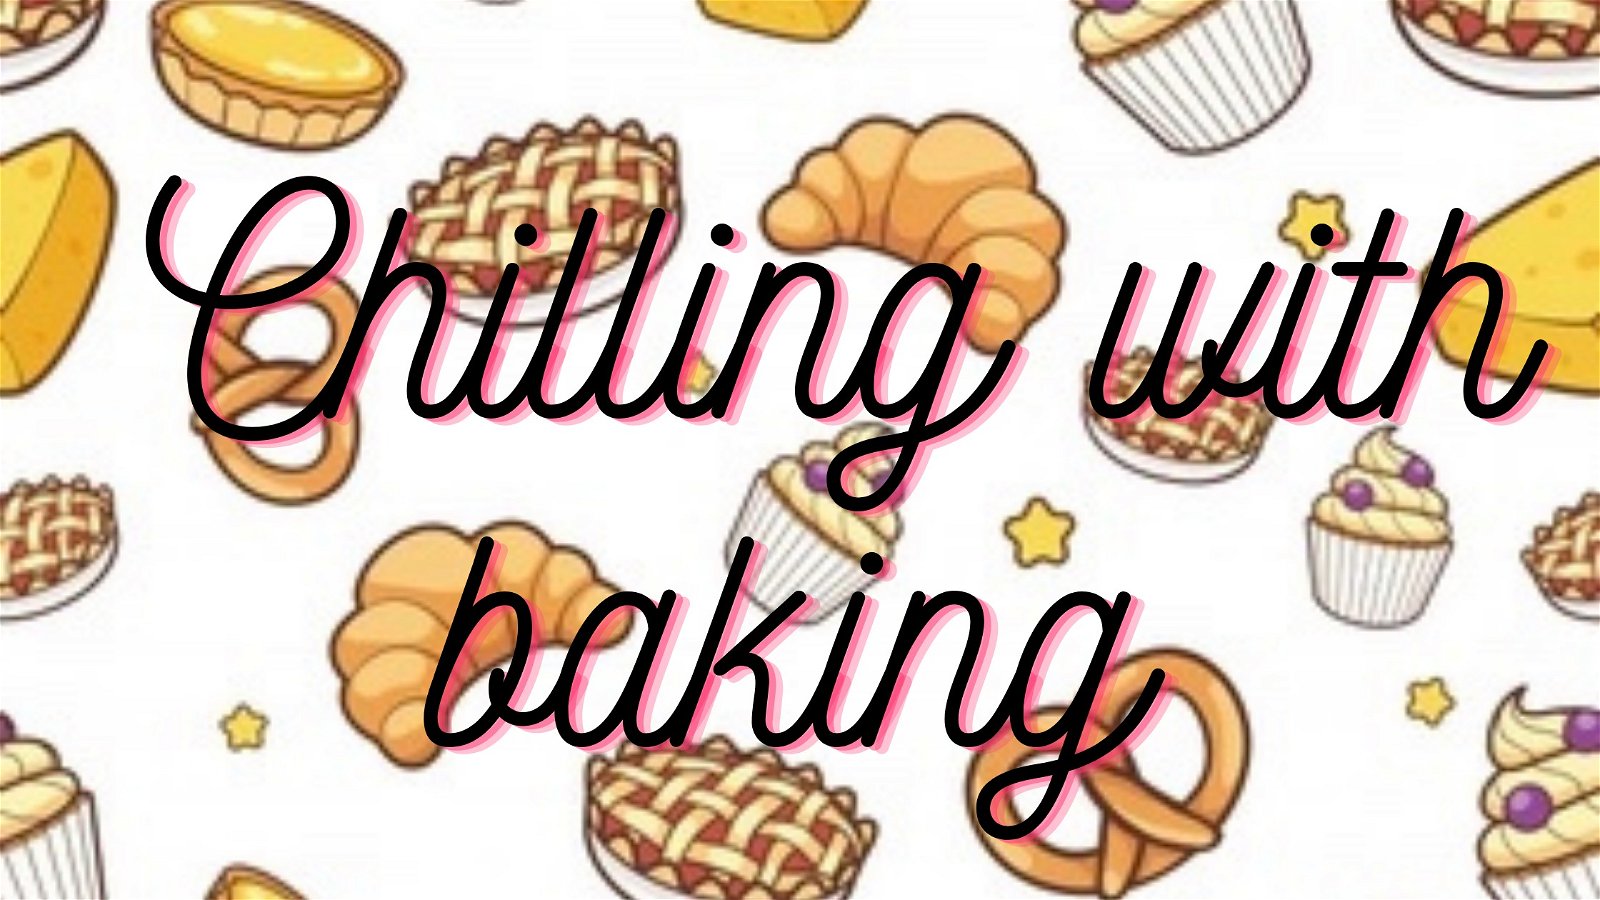 Chilling with baking